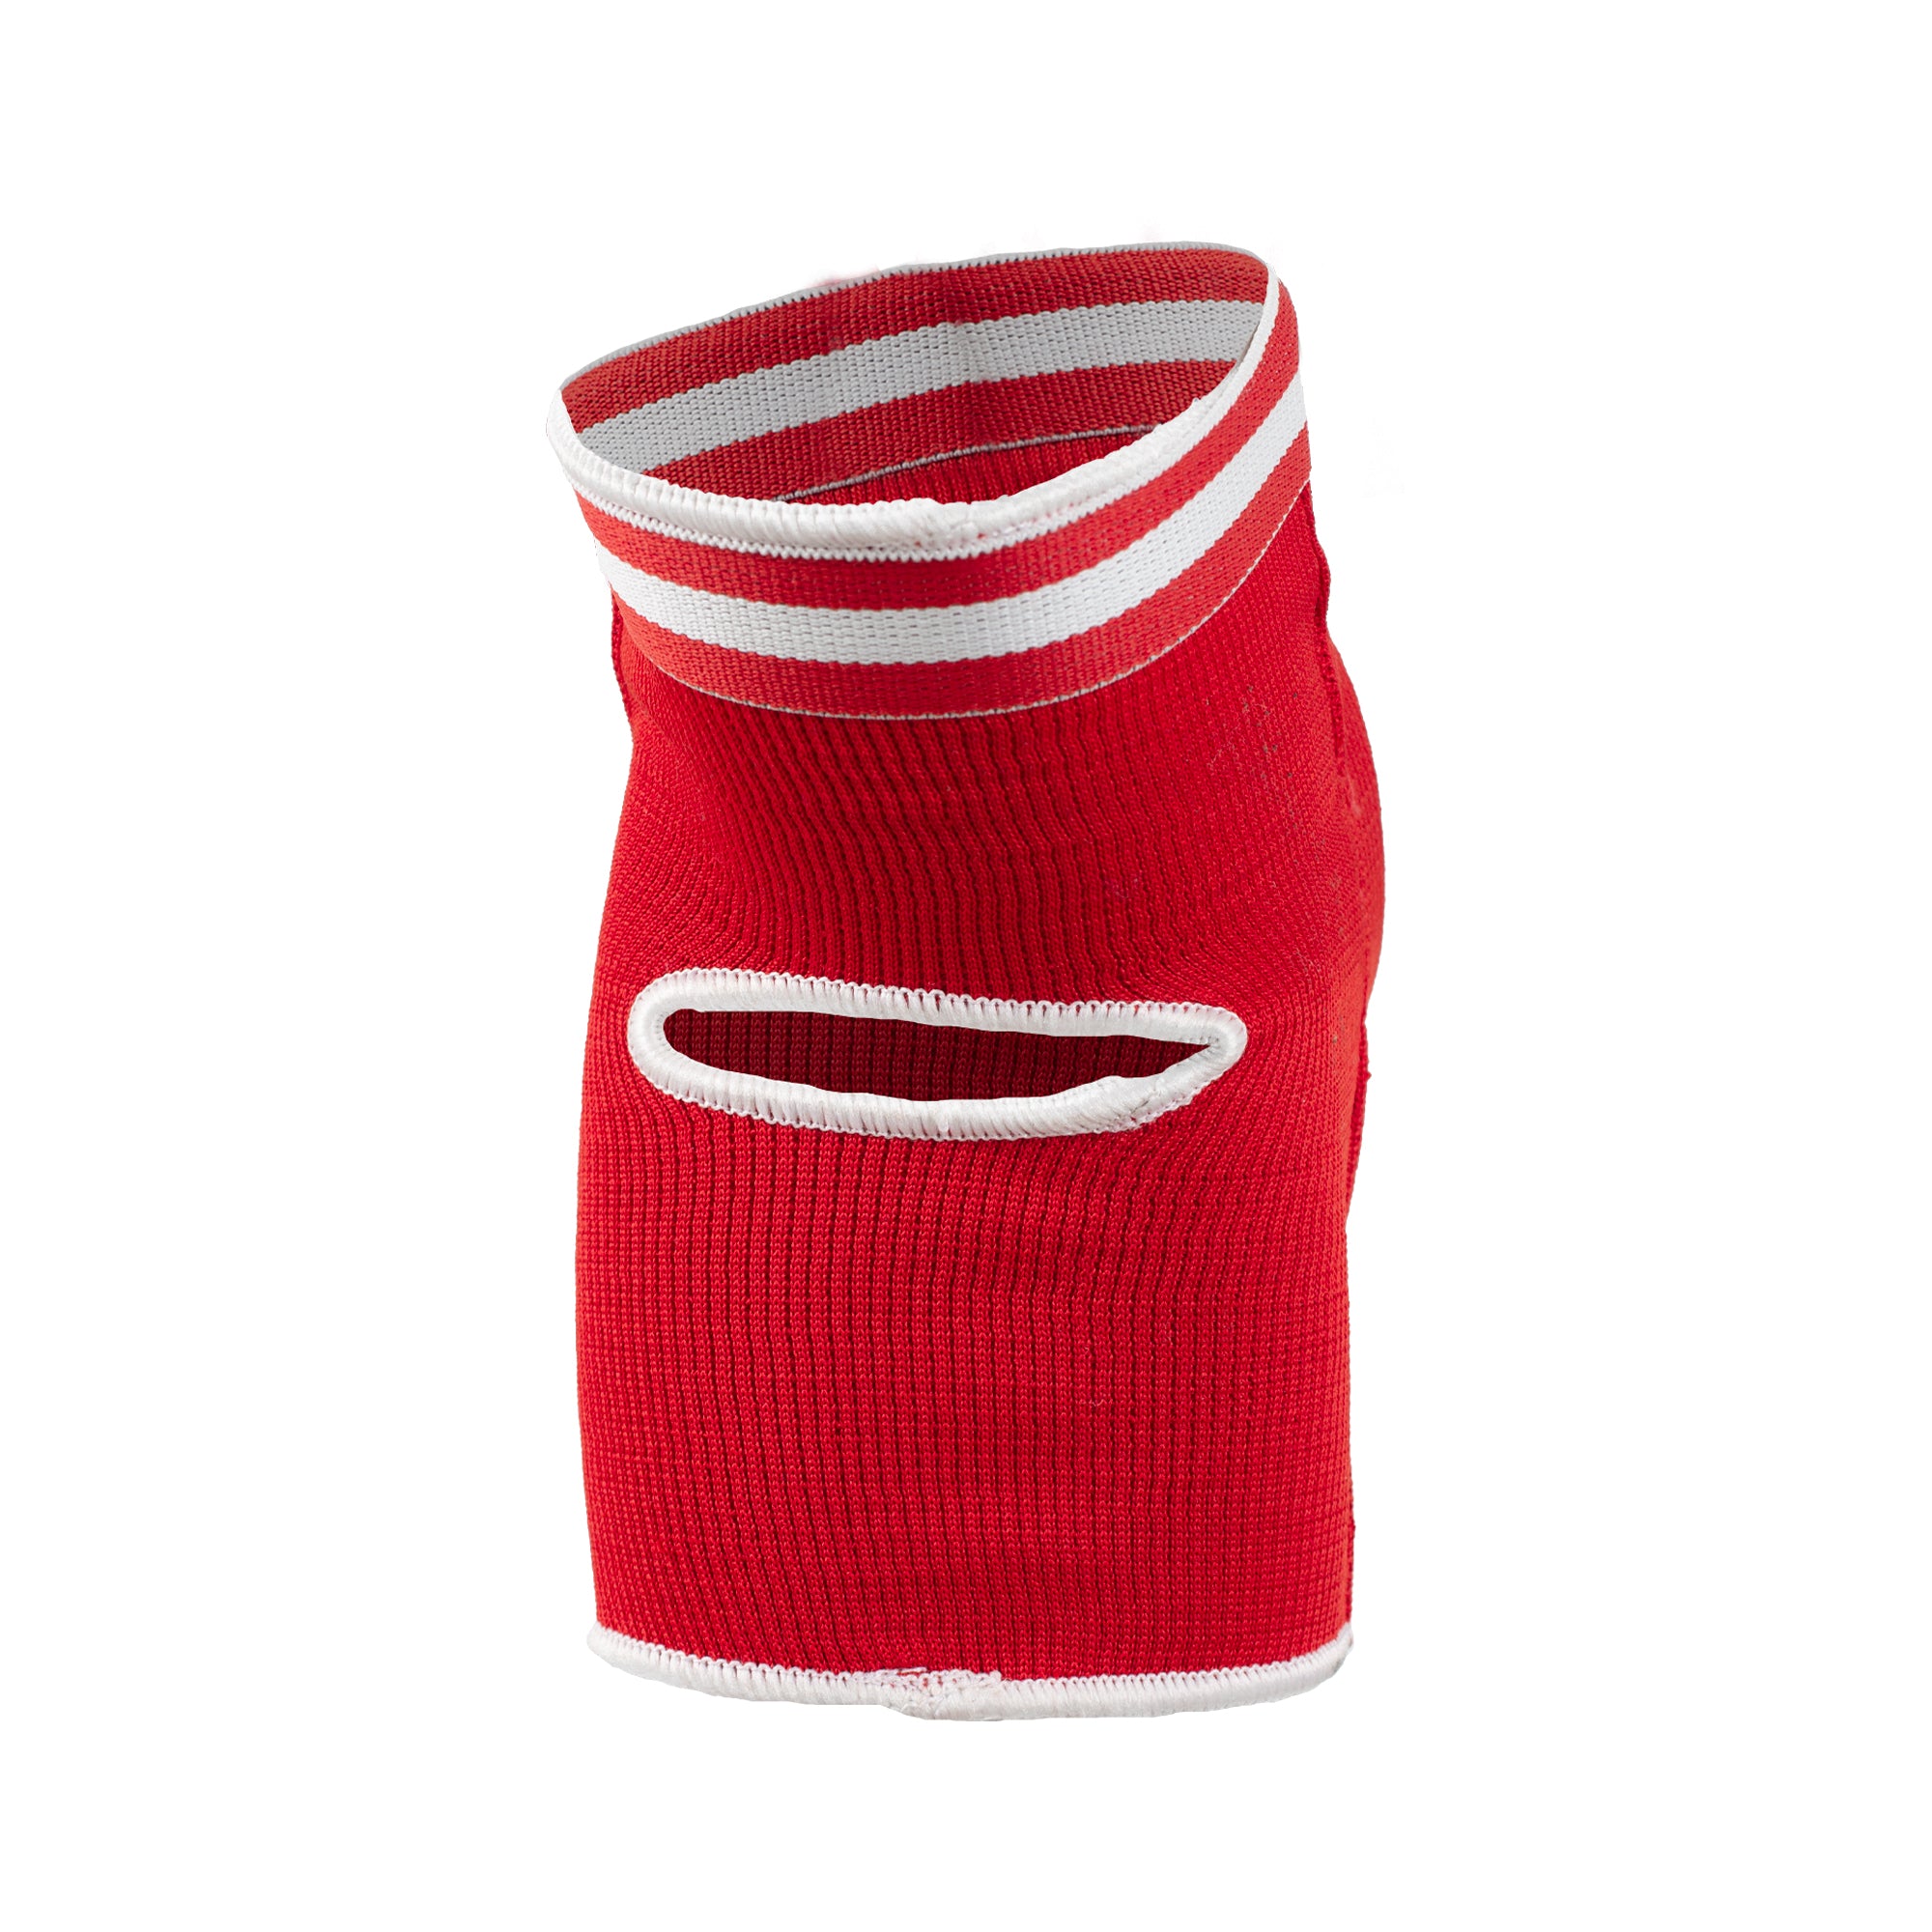 Achieve Pearly Red Elbow Guard